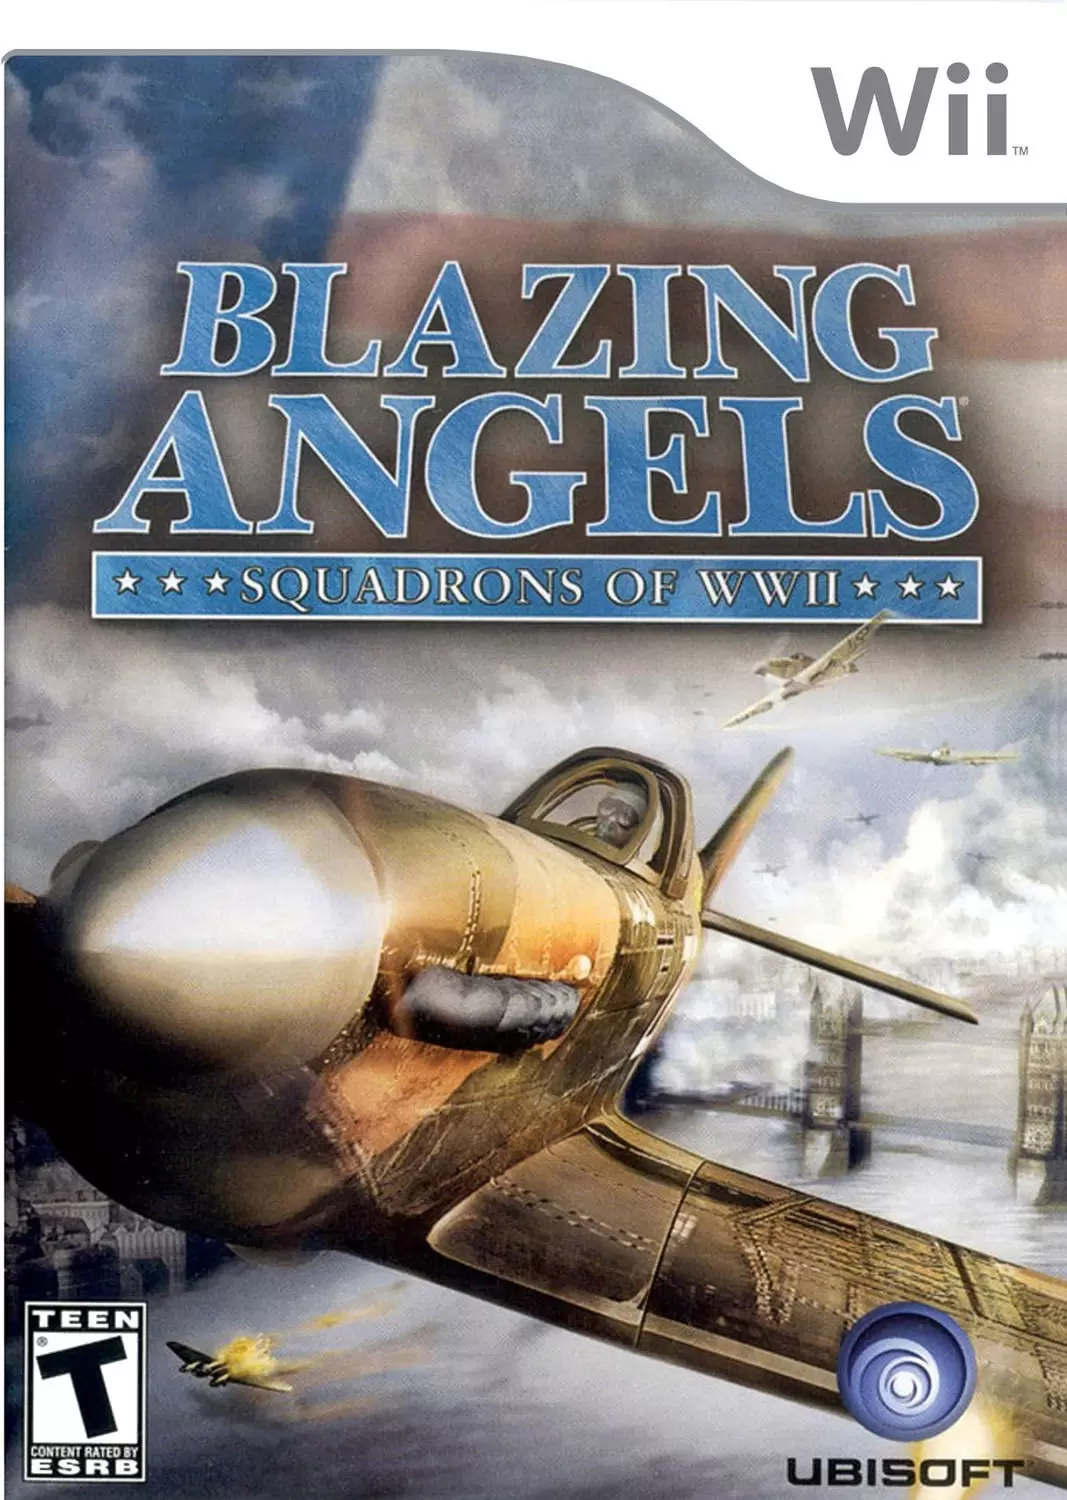 Nintendo Wii Games - Blazing Angels: Squadrons of WWII